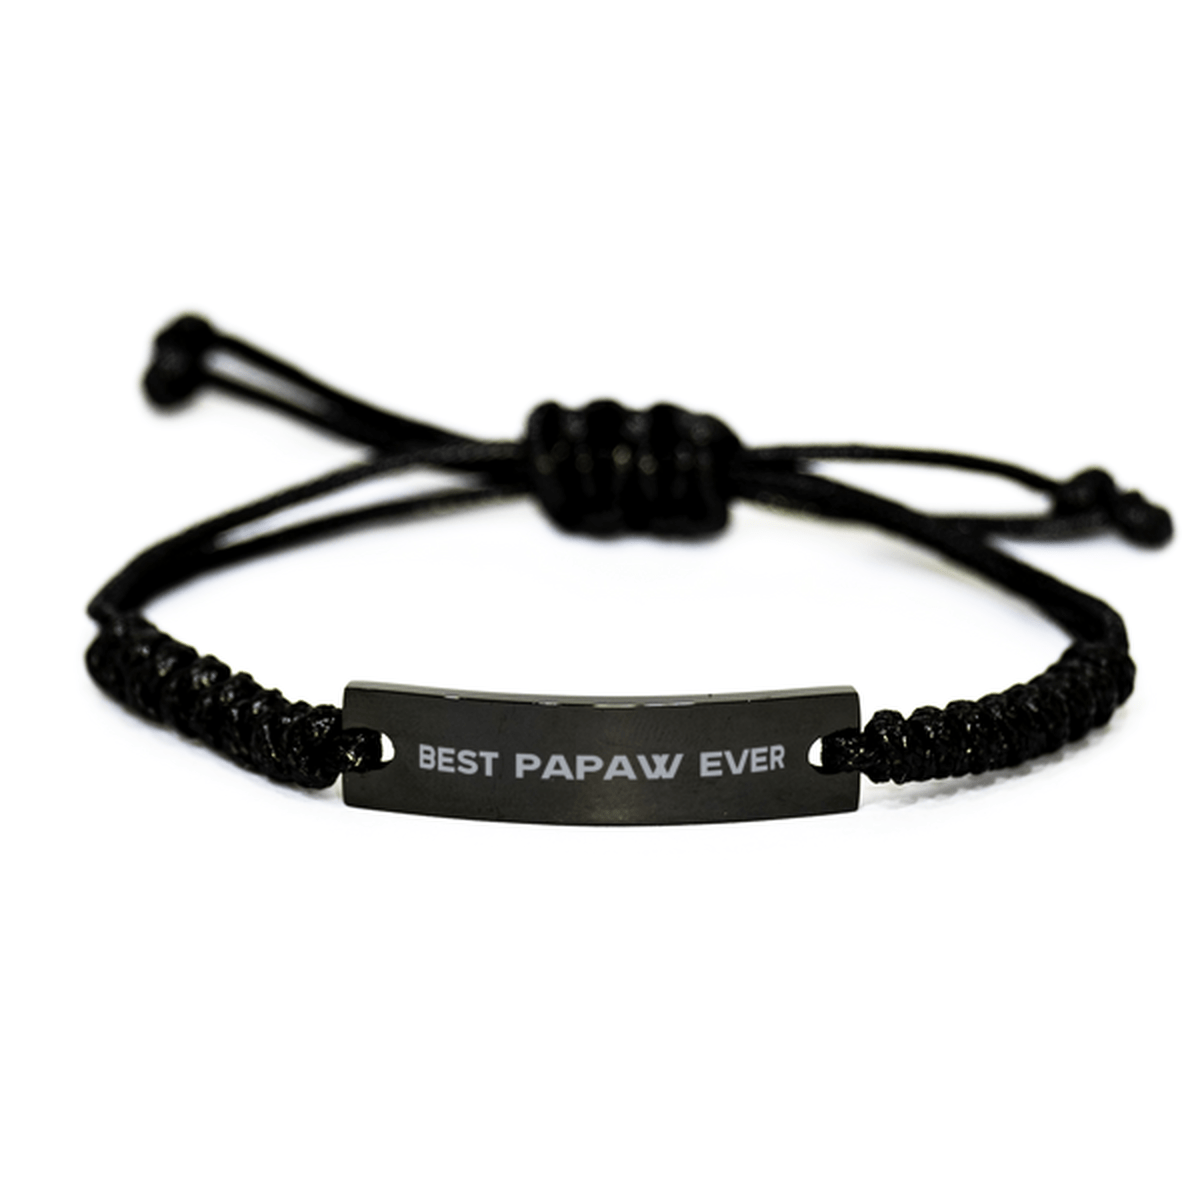 Unique Papaw Black Rope Bracelet, Best Papaw Ever, Gift for Papaw